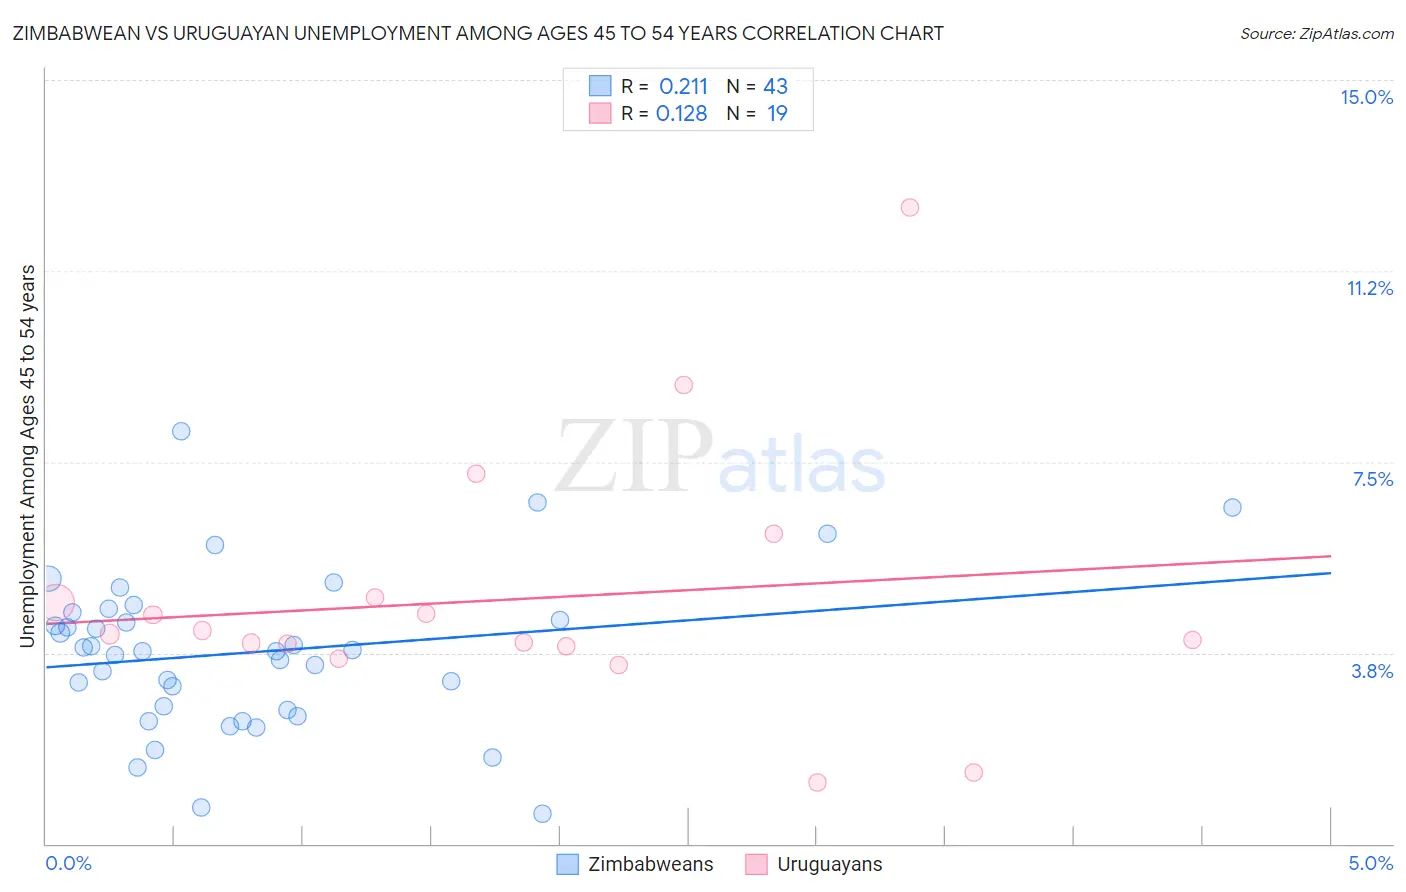 Zimbabwean vs Uruguayan Unemployment Among Ages 45 to 54 years